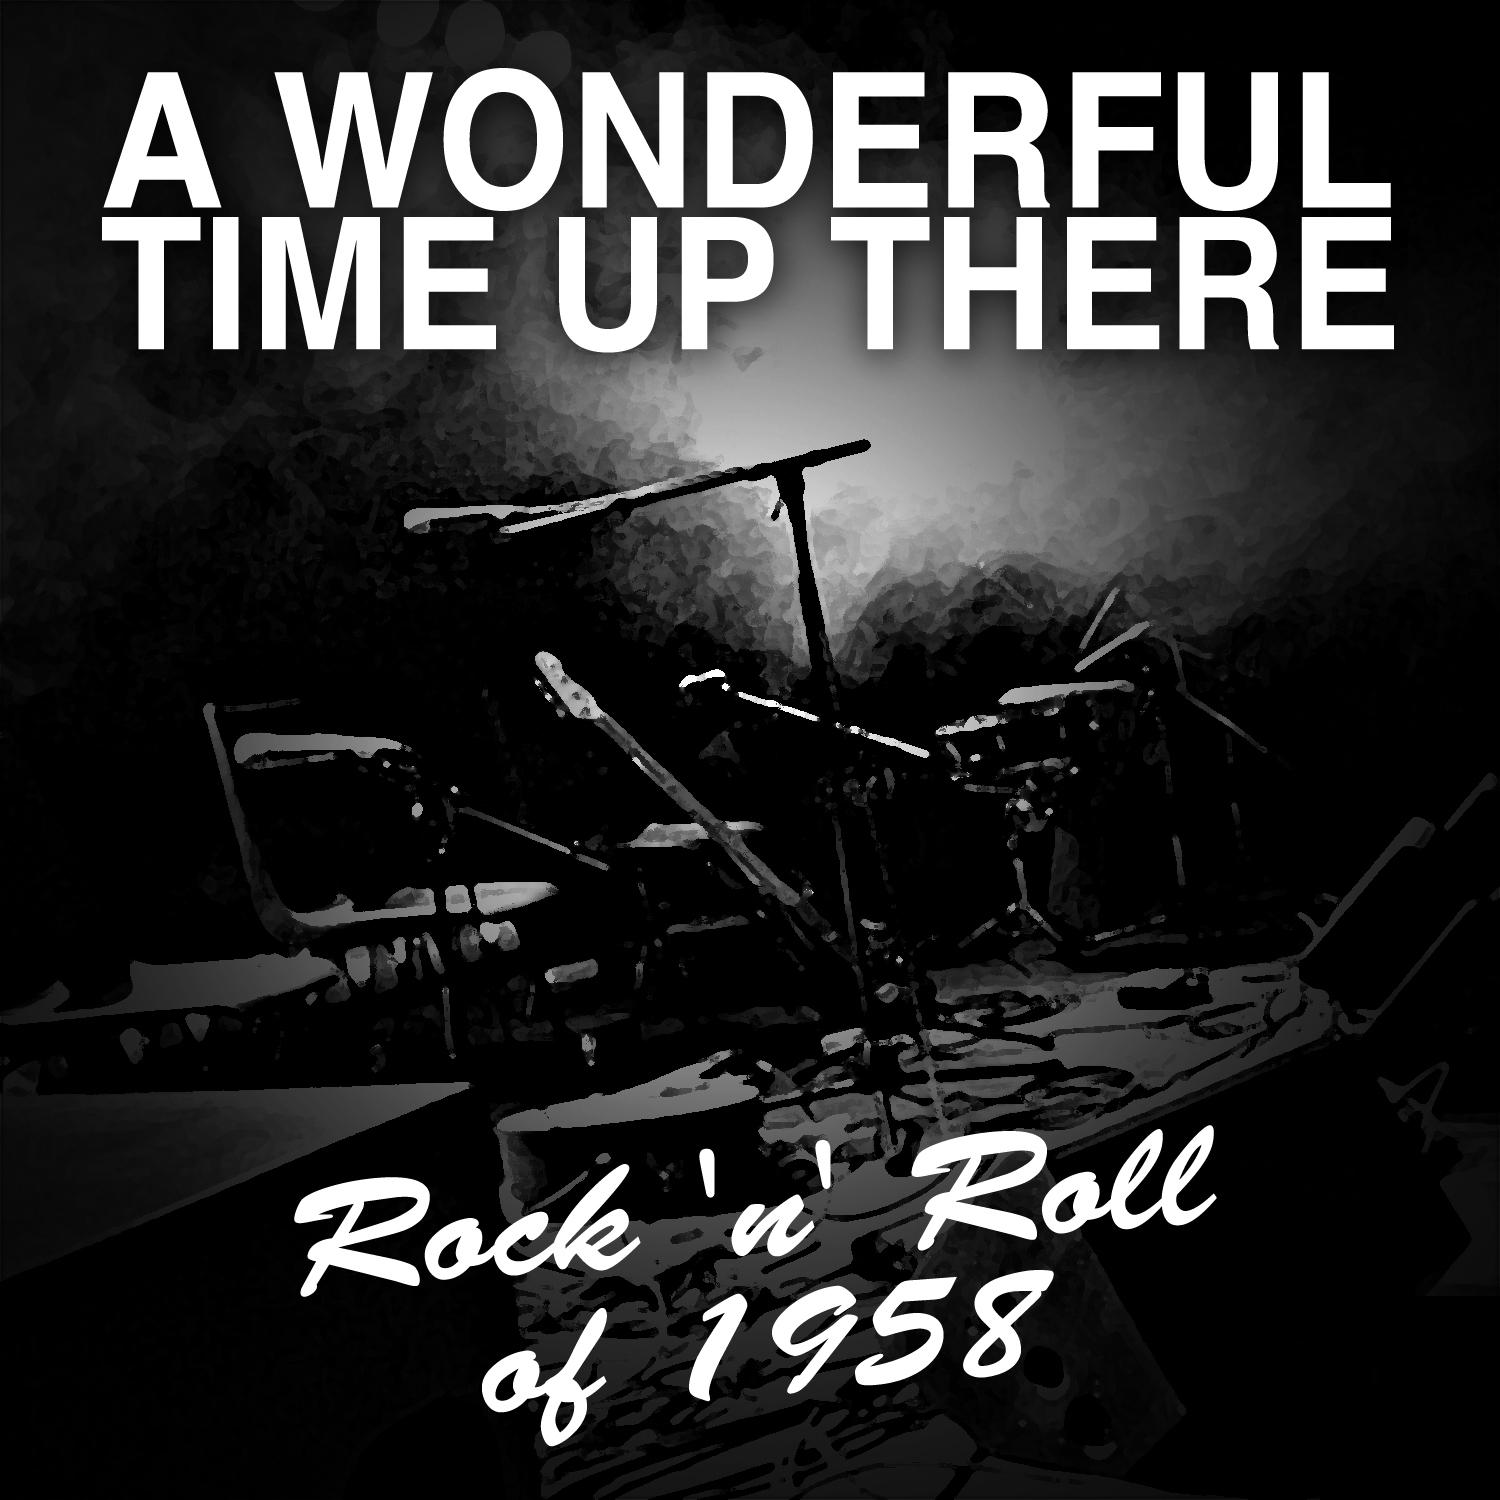 A Wonderful Time up There: Rock 'N' Roll of 1958